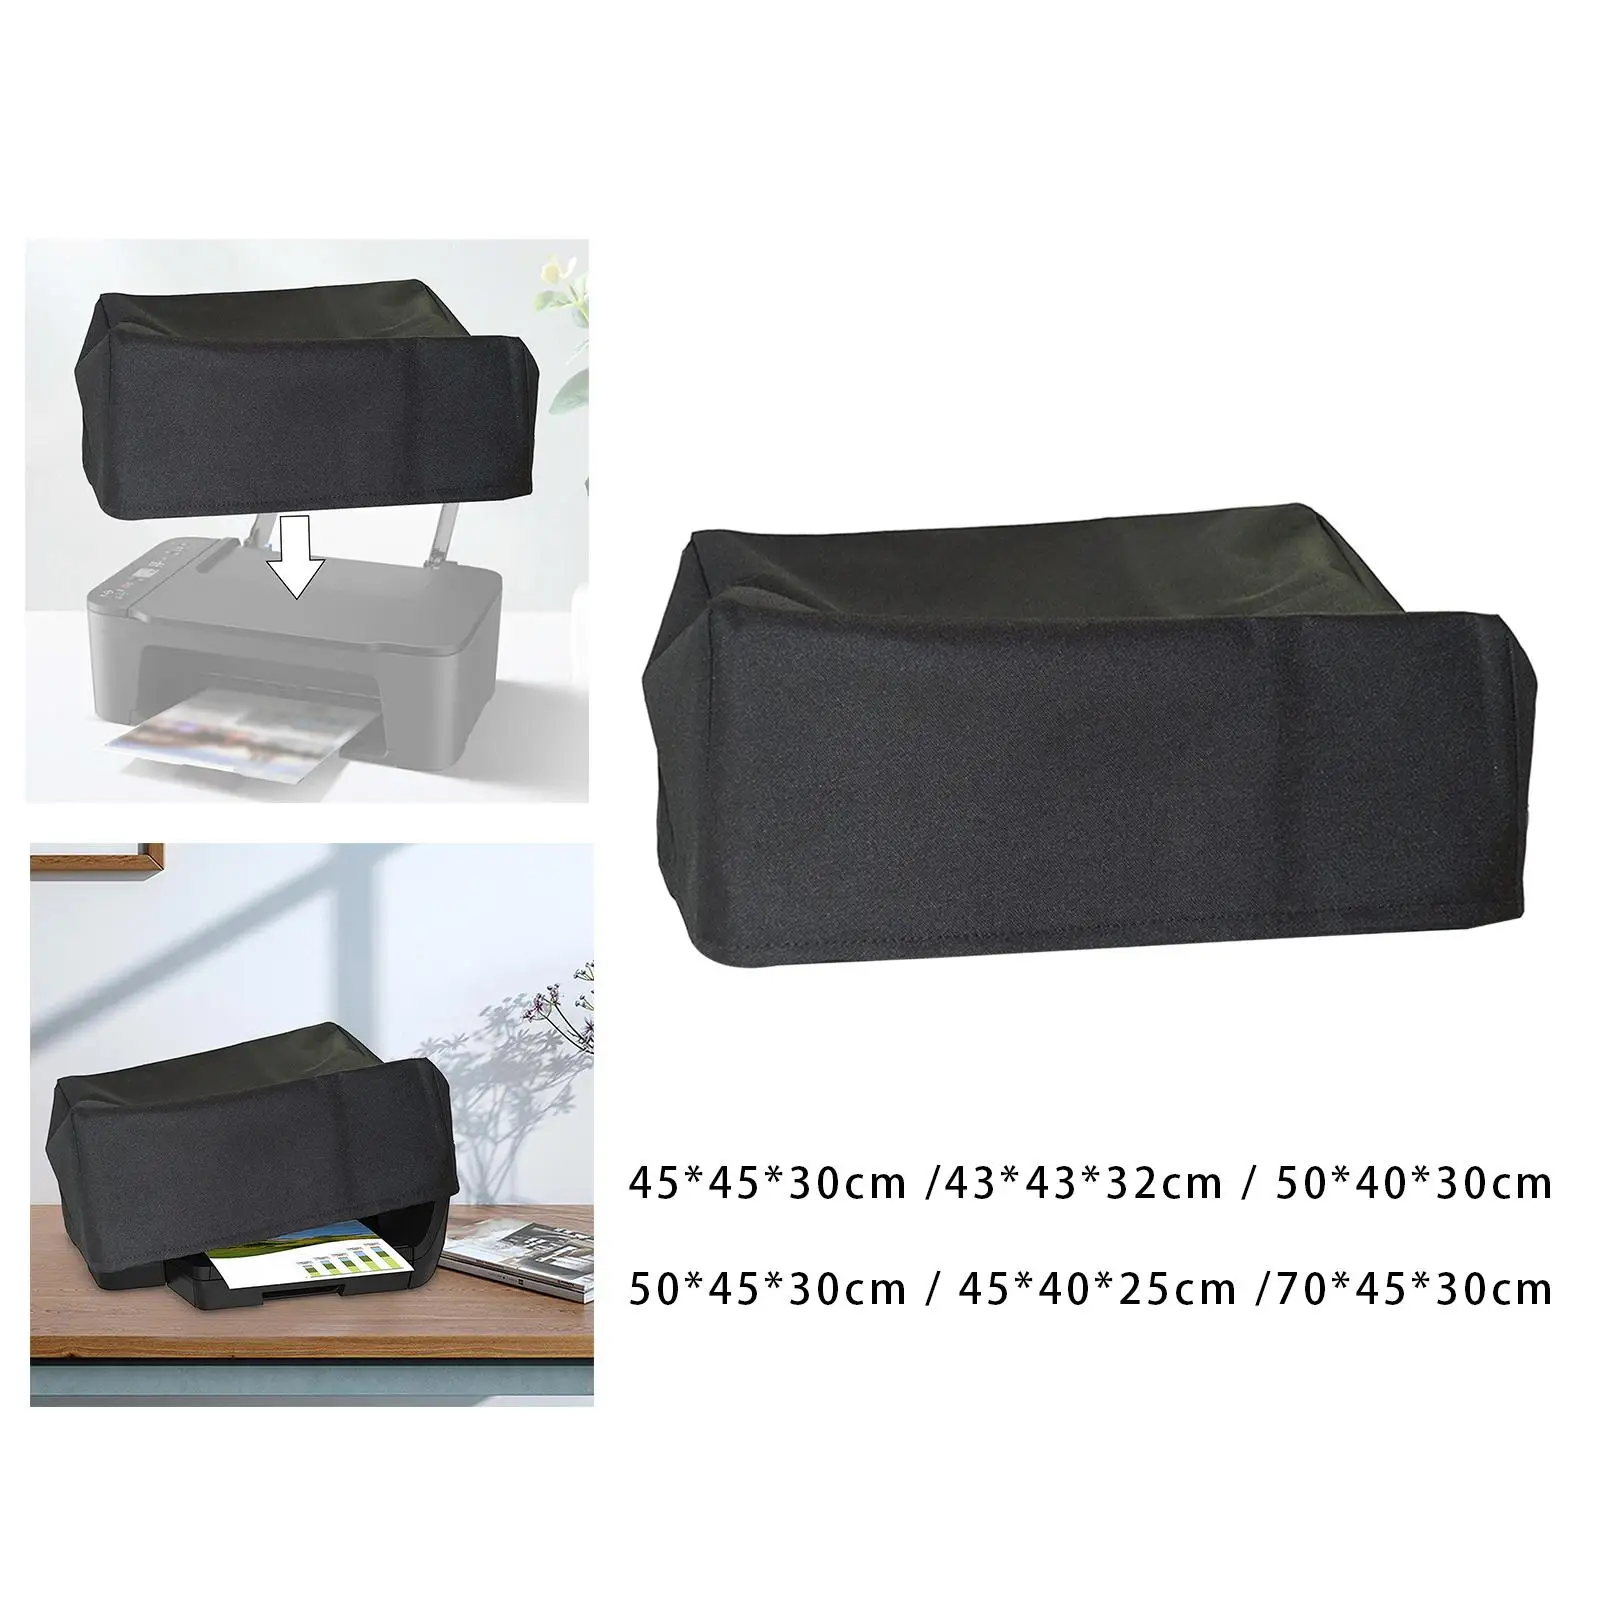 Printer Cover Waterproof Universal Durable Rainproof Foldable Copiers Protective Cover Reusable Printer Jacket Oxford for 9015